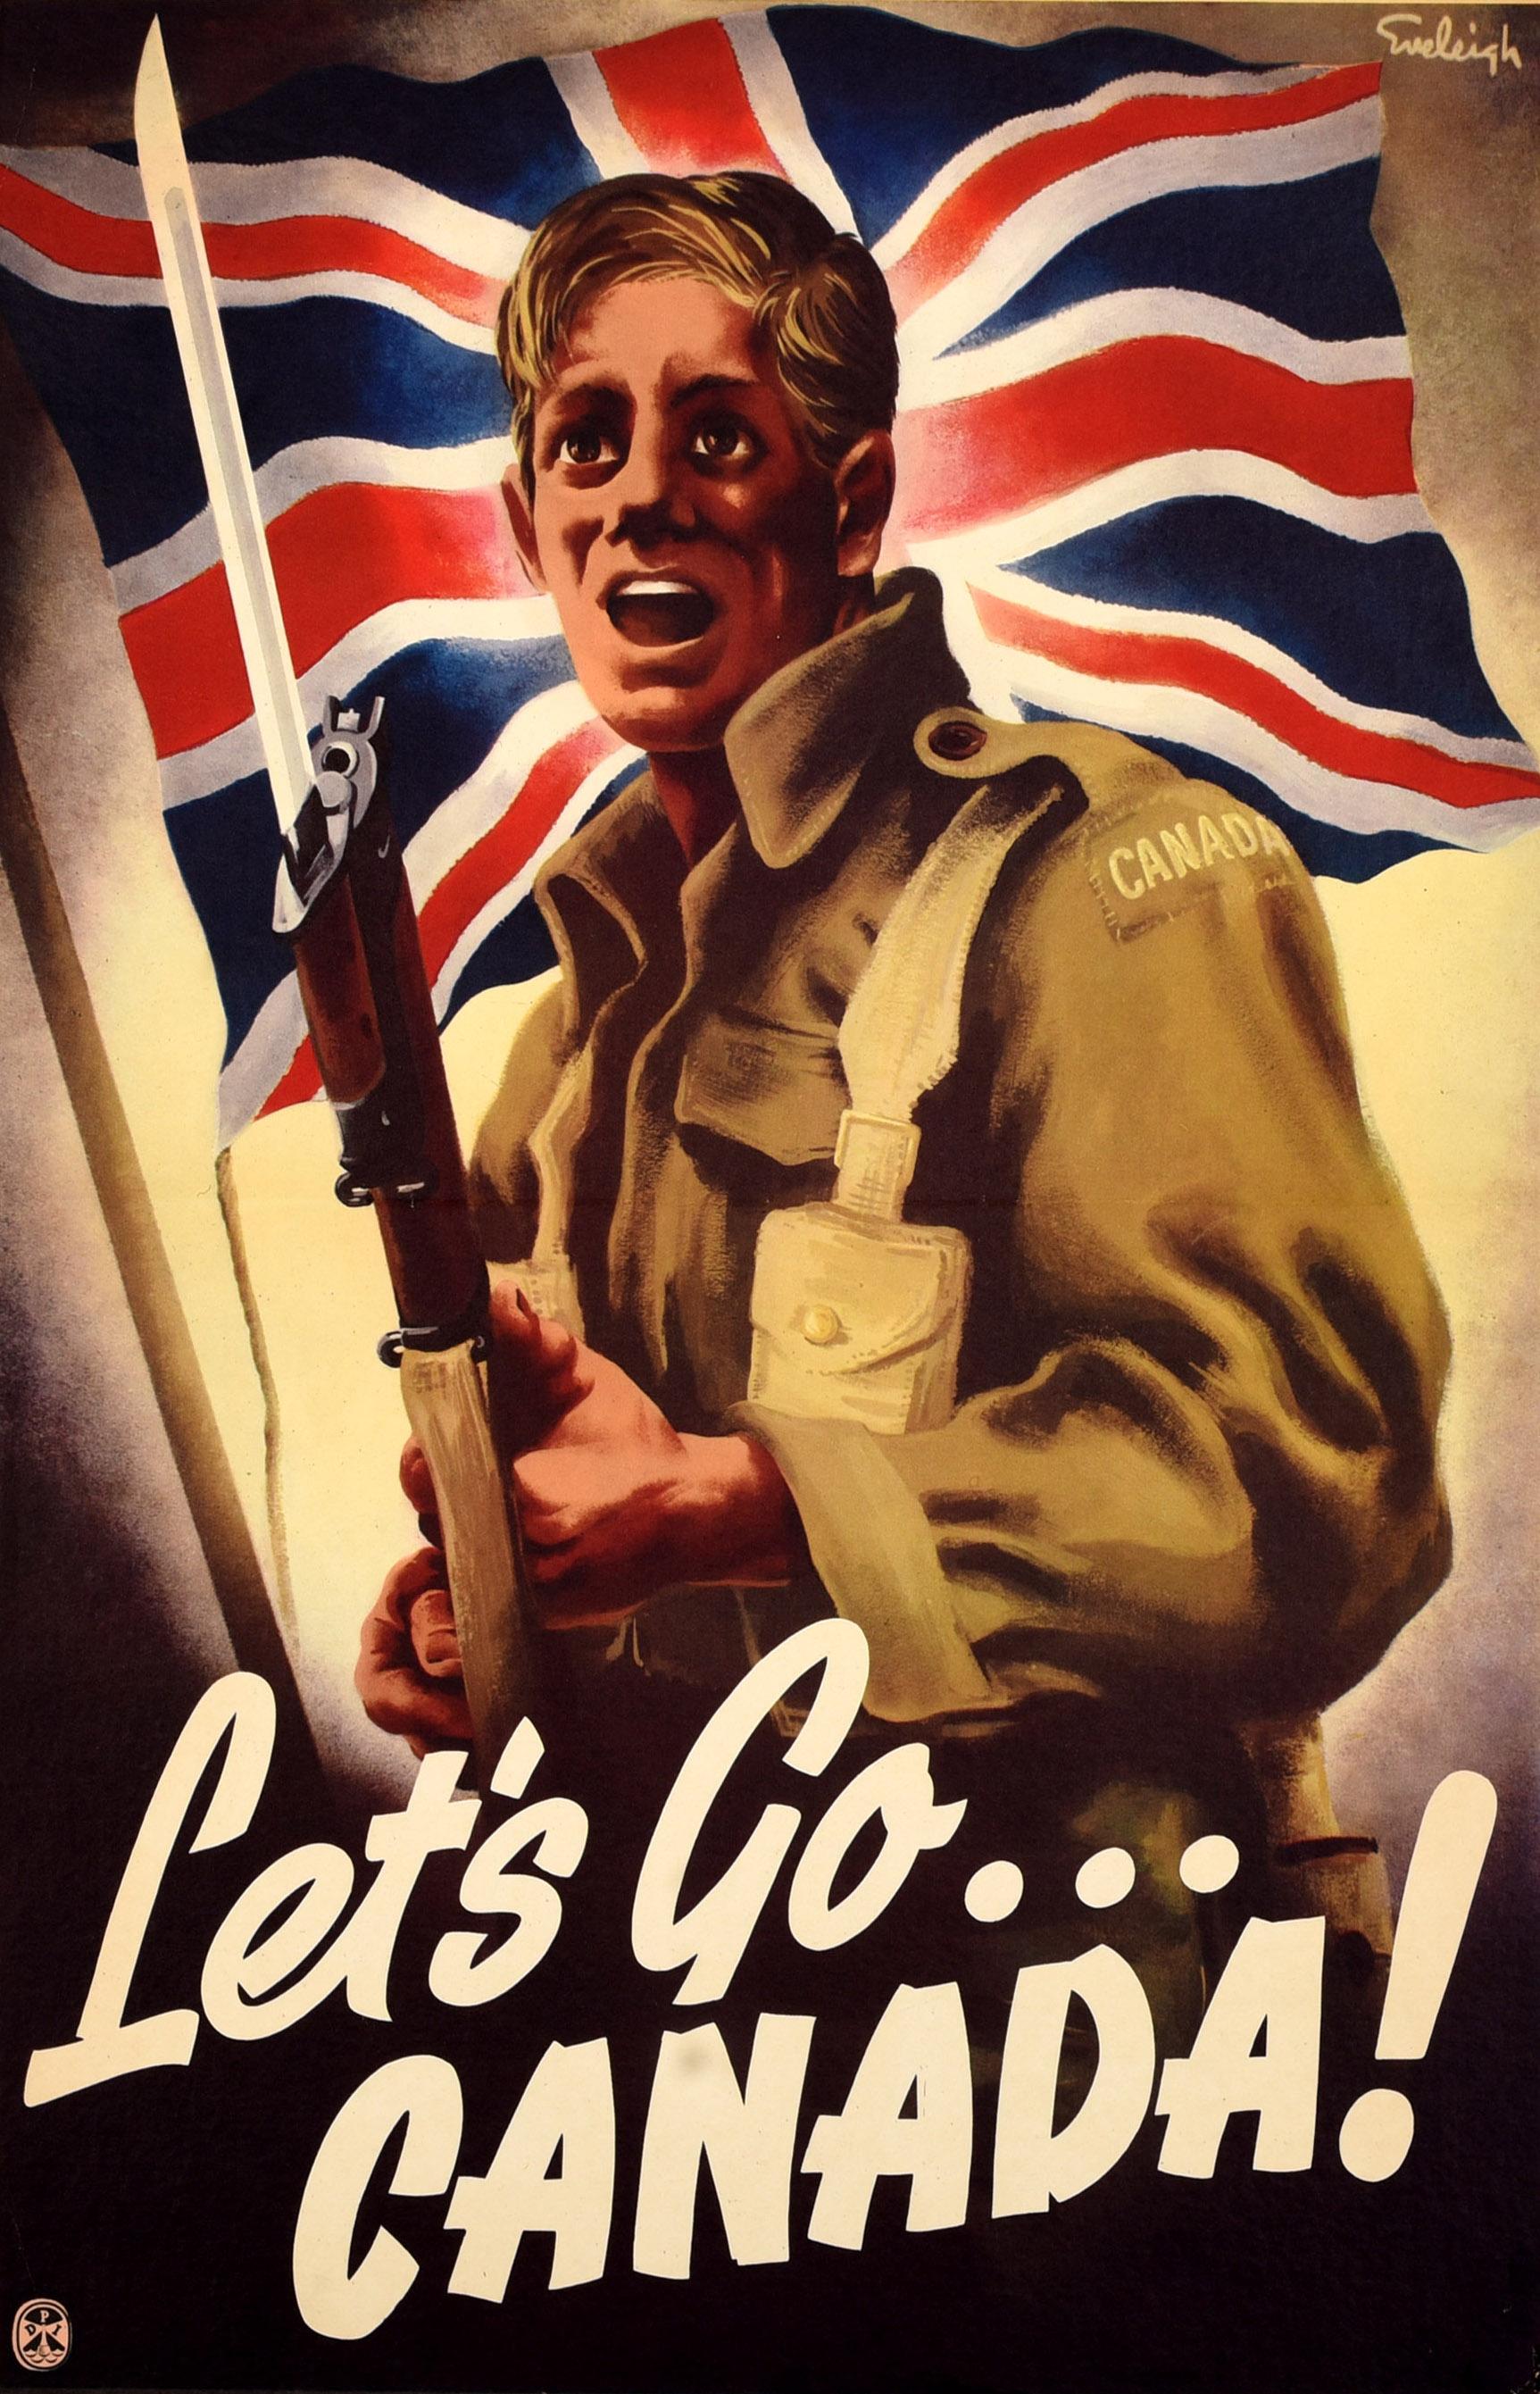 Original Vintage Canadian World War Two Propaganda Poster WWII Lets Go Canada - Print by Unknown